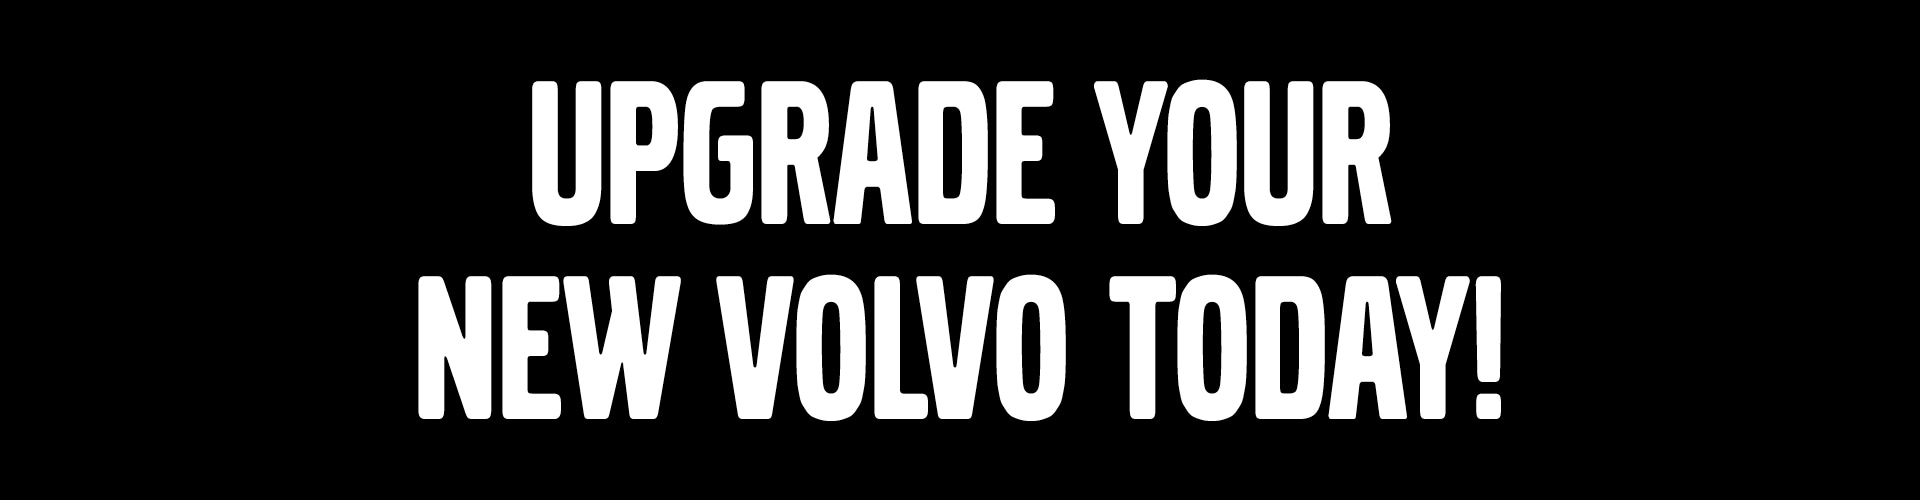 Upgrade your new Volvo today